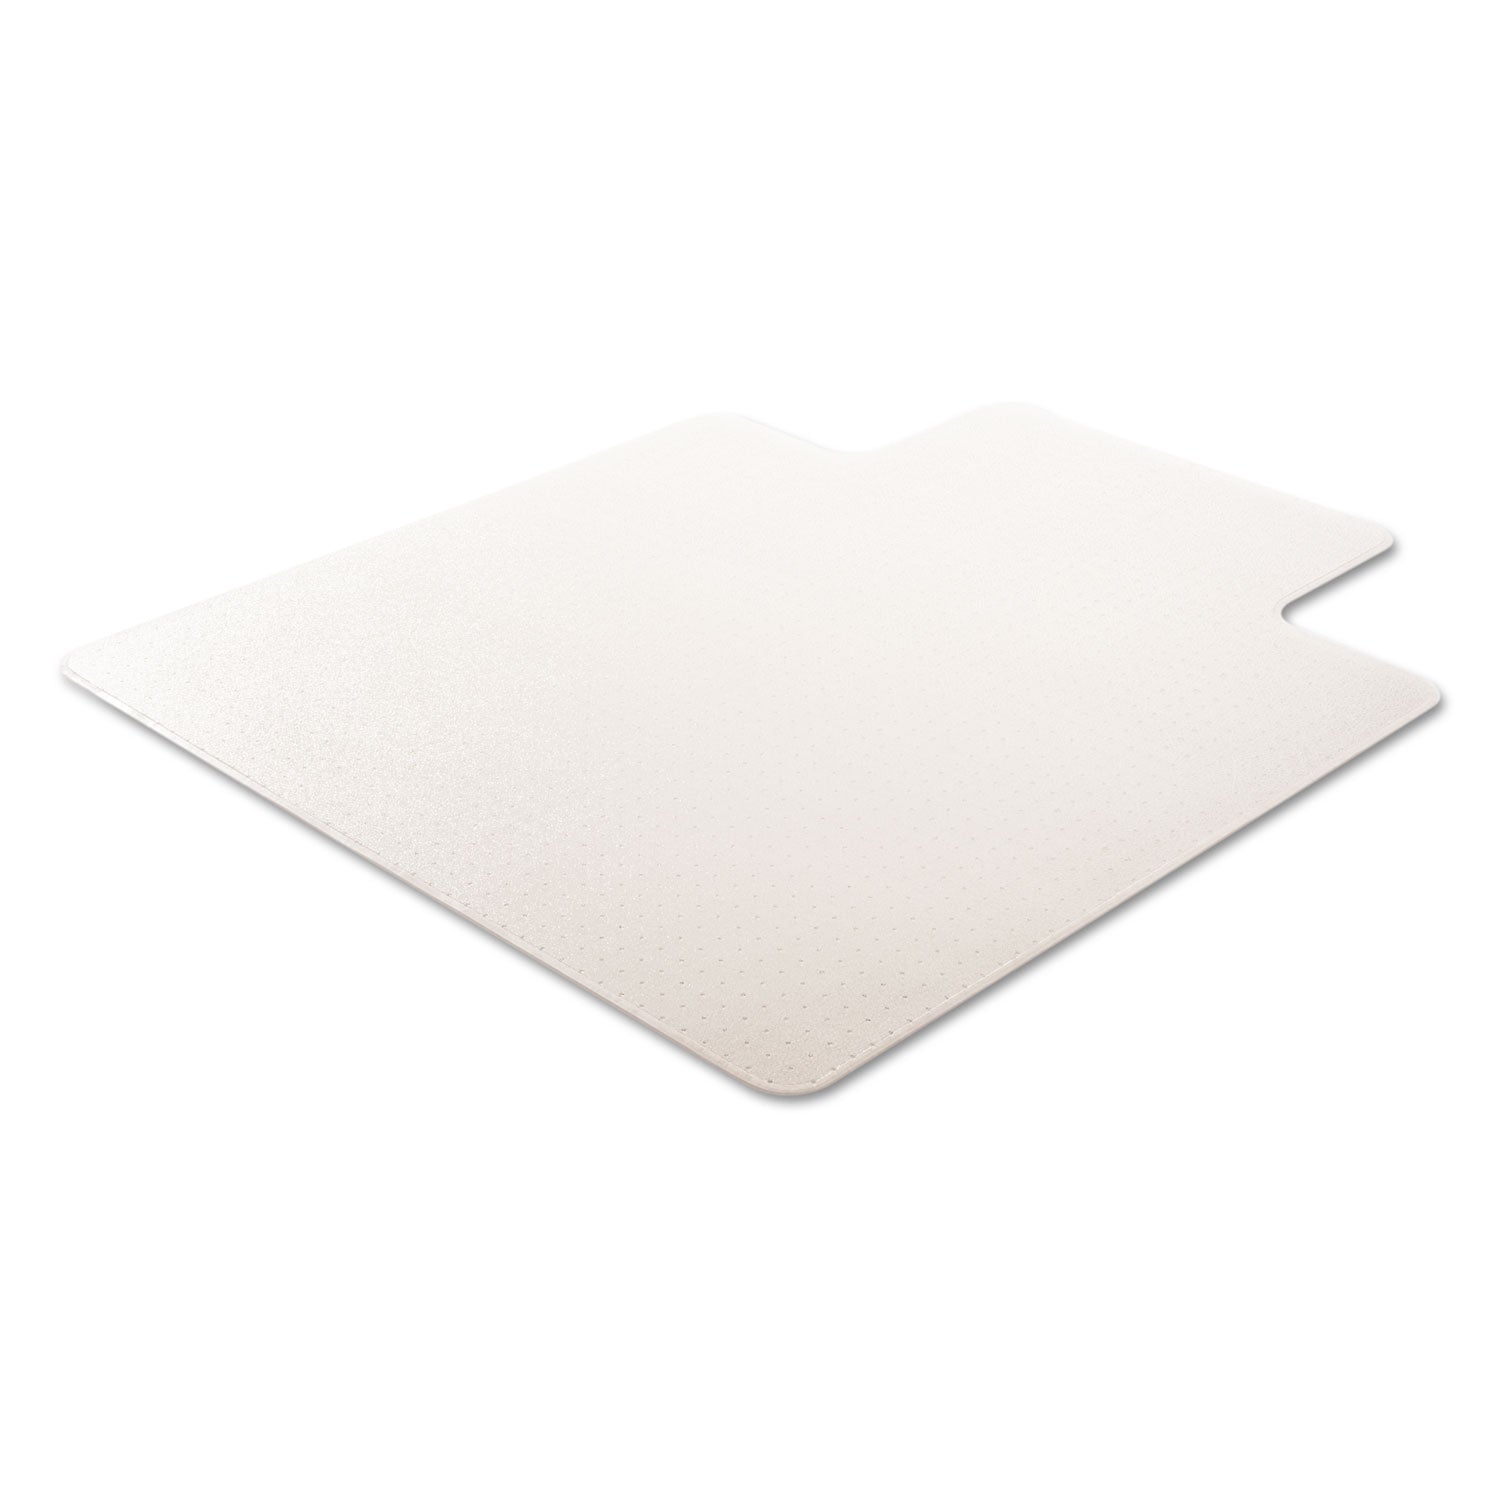 RollaMat Frequent Use Chair Mat, Med Pile Carpet, Flat, 45 x 53, Wide Lipped, Clear - 